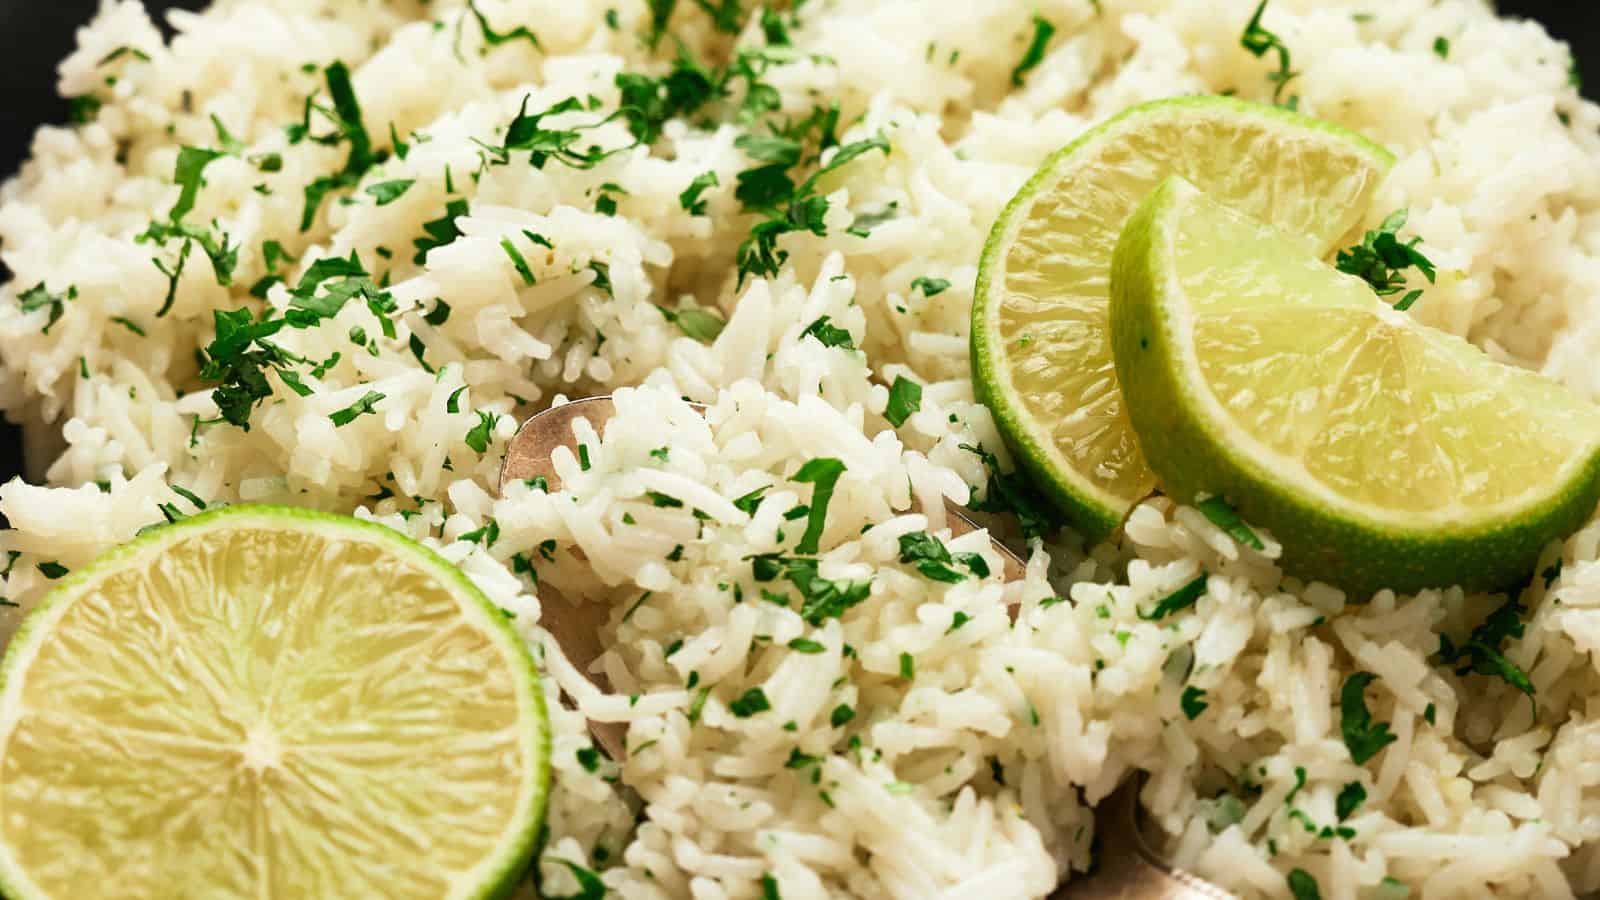 Close-up of a plate of rice garnished with chopped herbs and slices of lime.